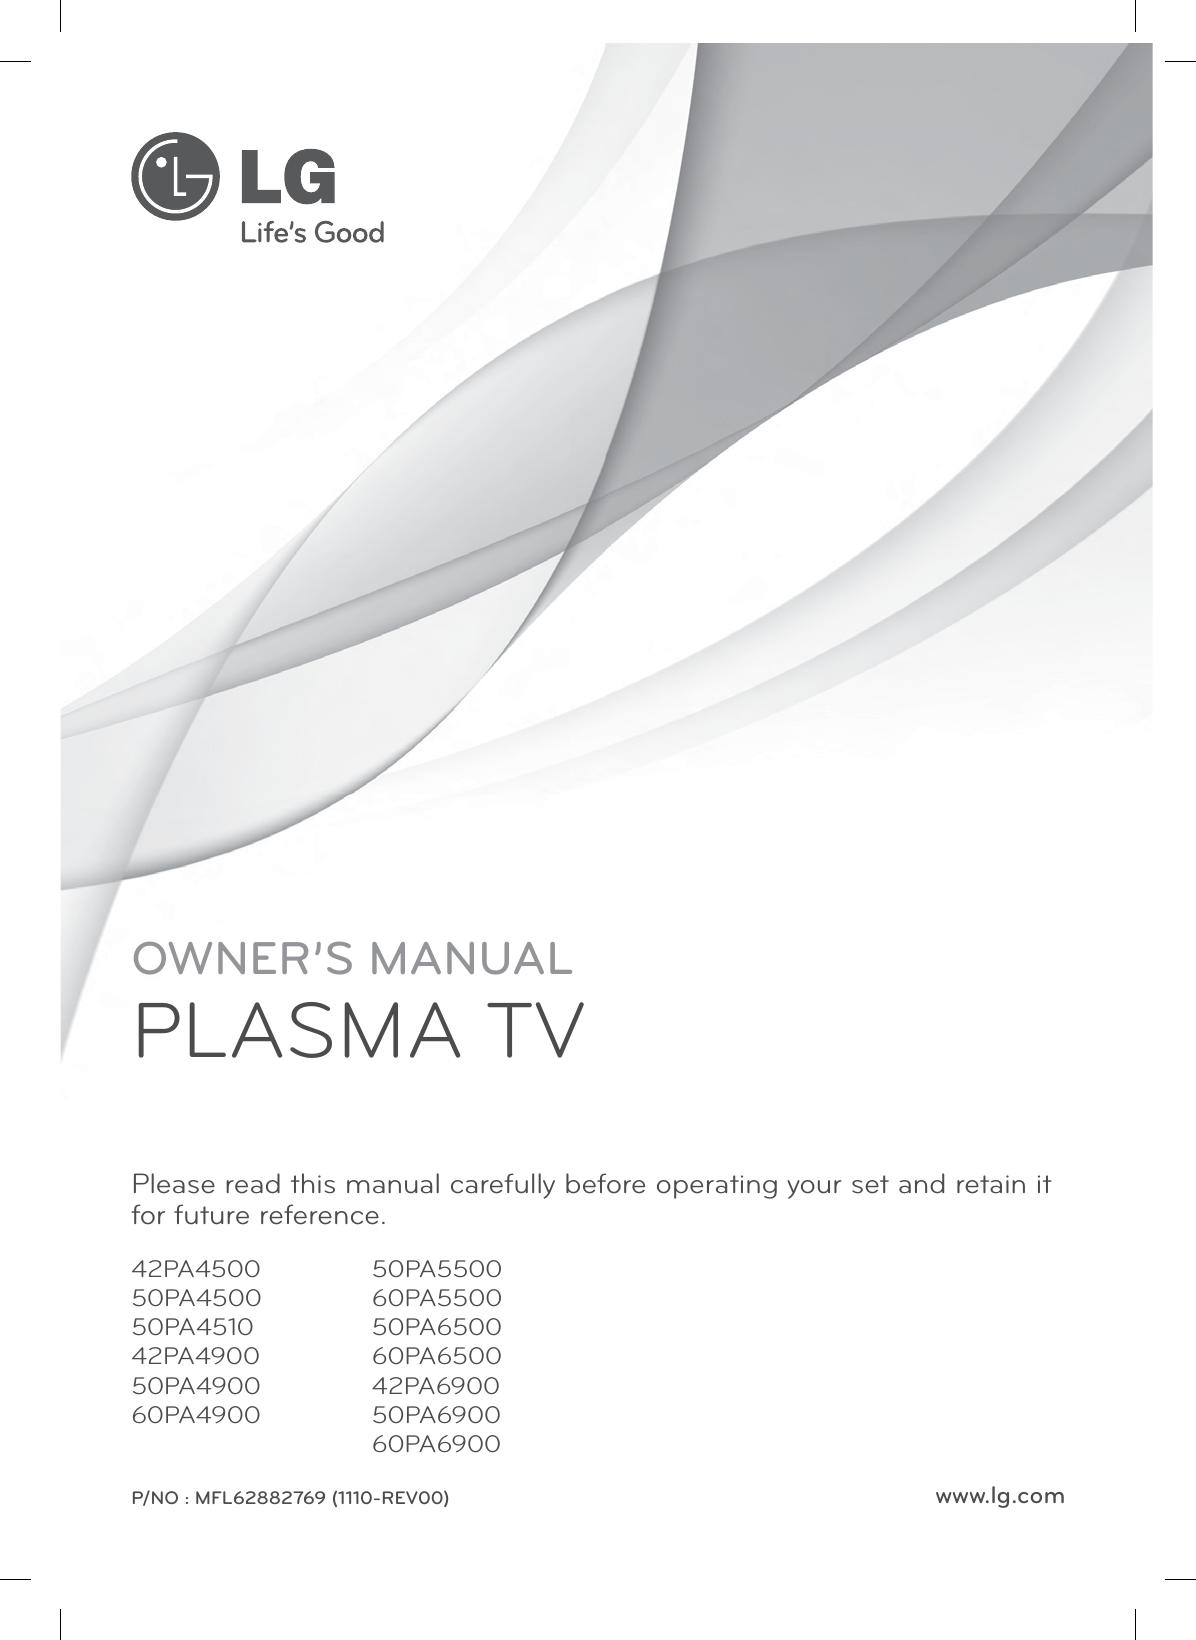 www.lg.comOWNER’S MANUALPLASMA TVPlease read this manual carefully before operating your set and retain it for future reference.P/NO : MFL62882769 (1110-REV00)42PA450050PA450050PA451042PA490050PA490060PA490050PA550060PA550050PA650060PA650042PA690050PA690060PA6900